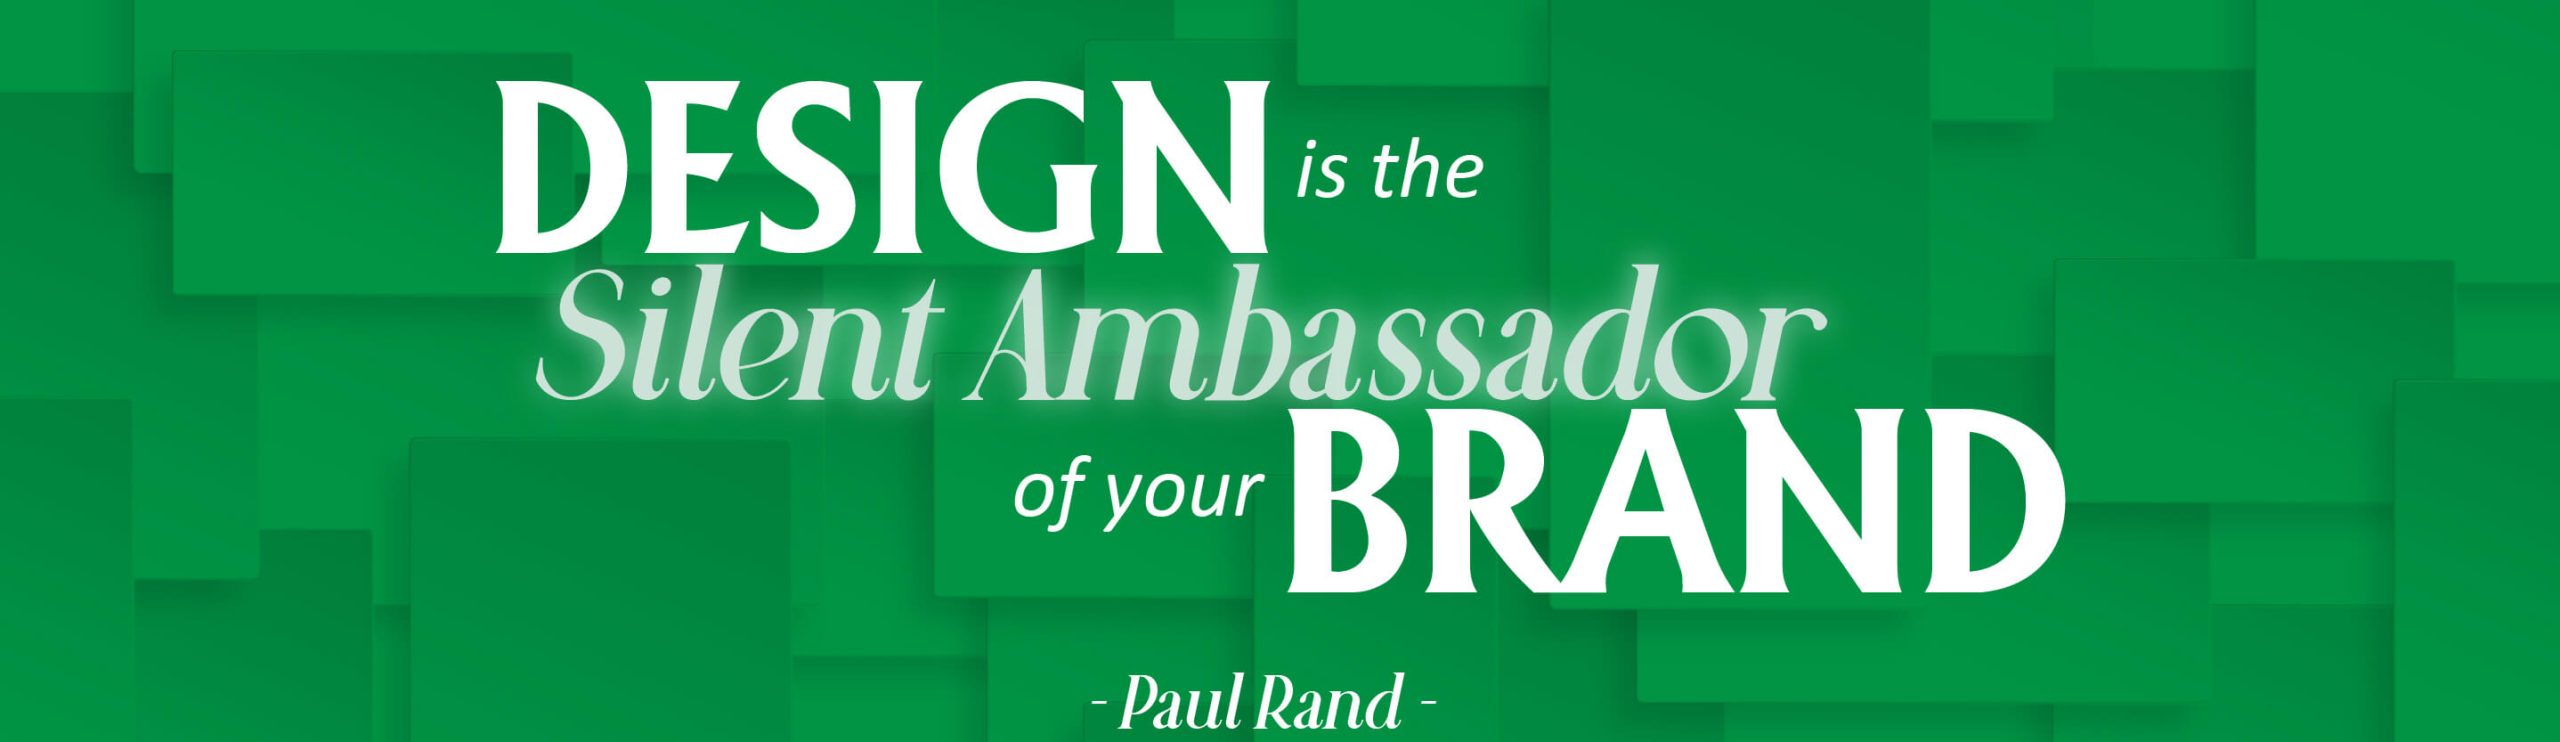 Design is the Silent Ambassador of your Brand. Quote by Paul Rand